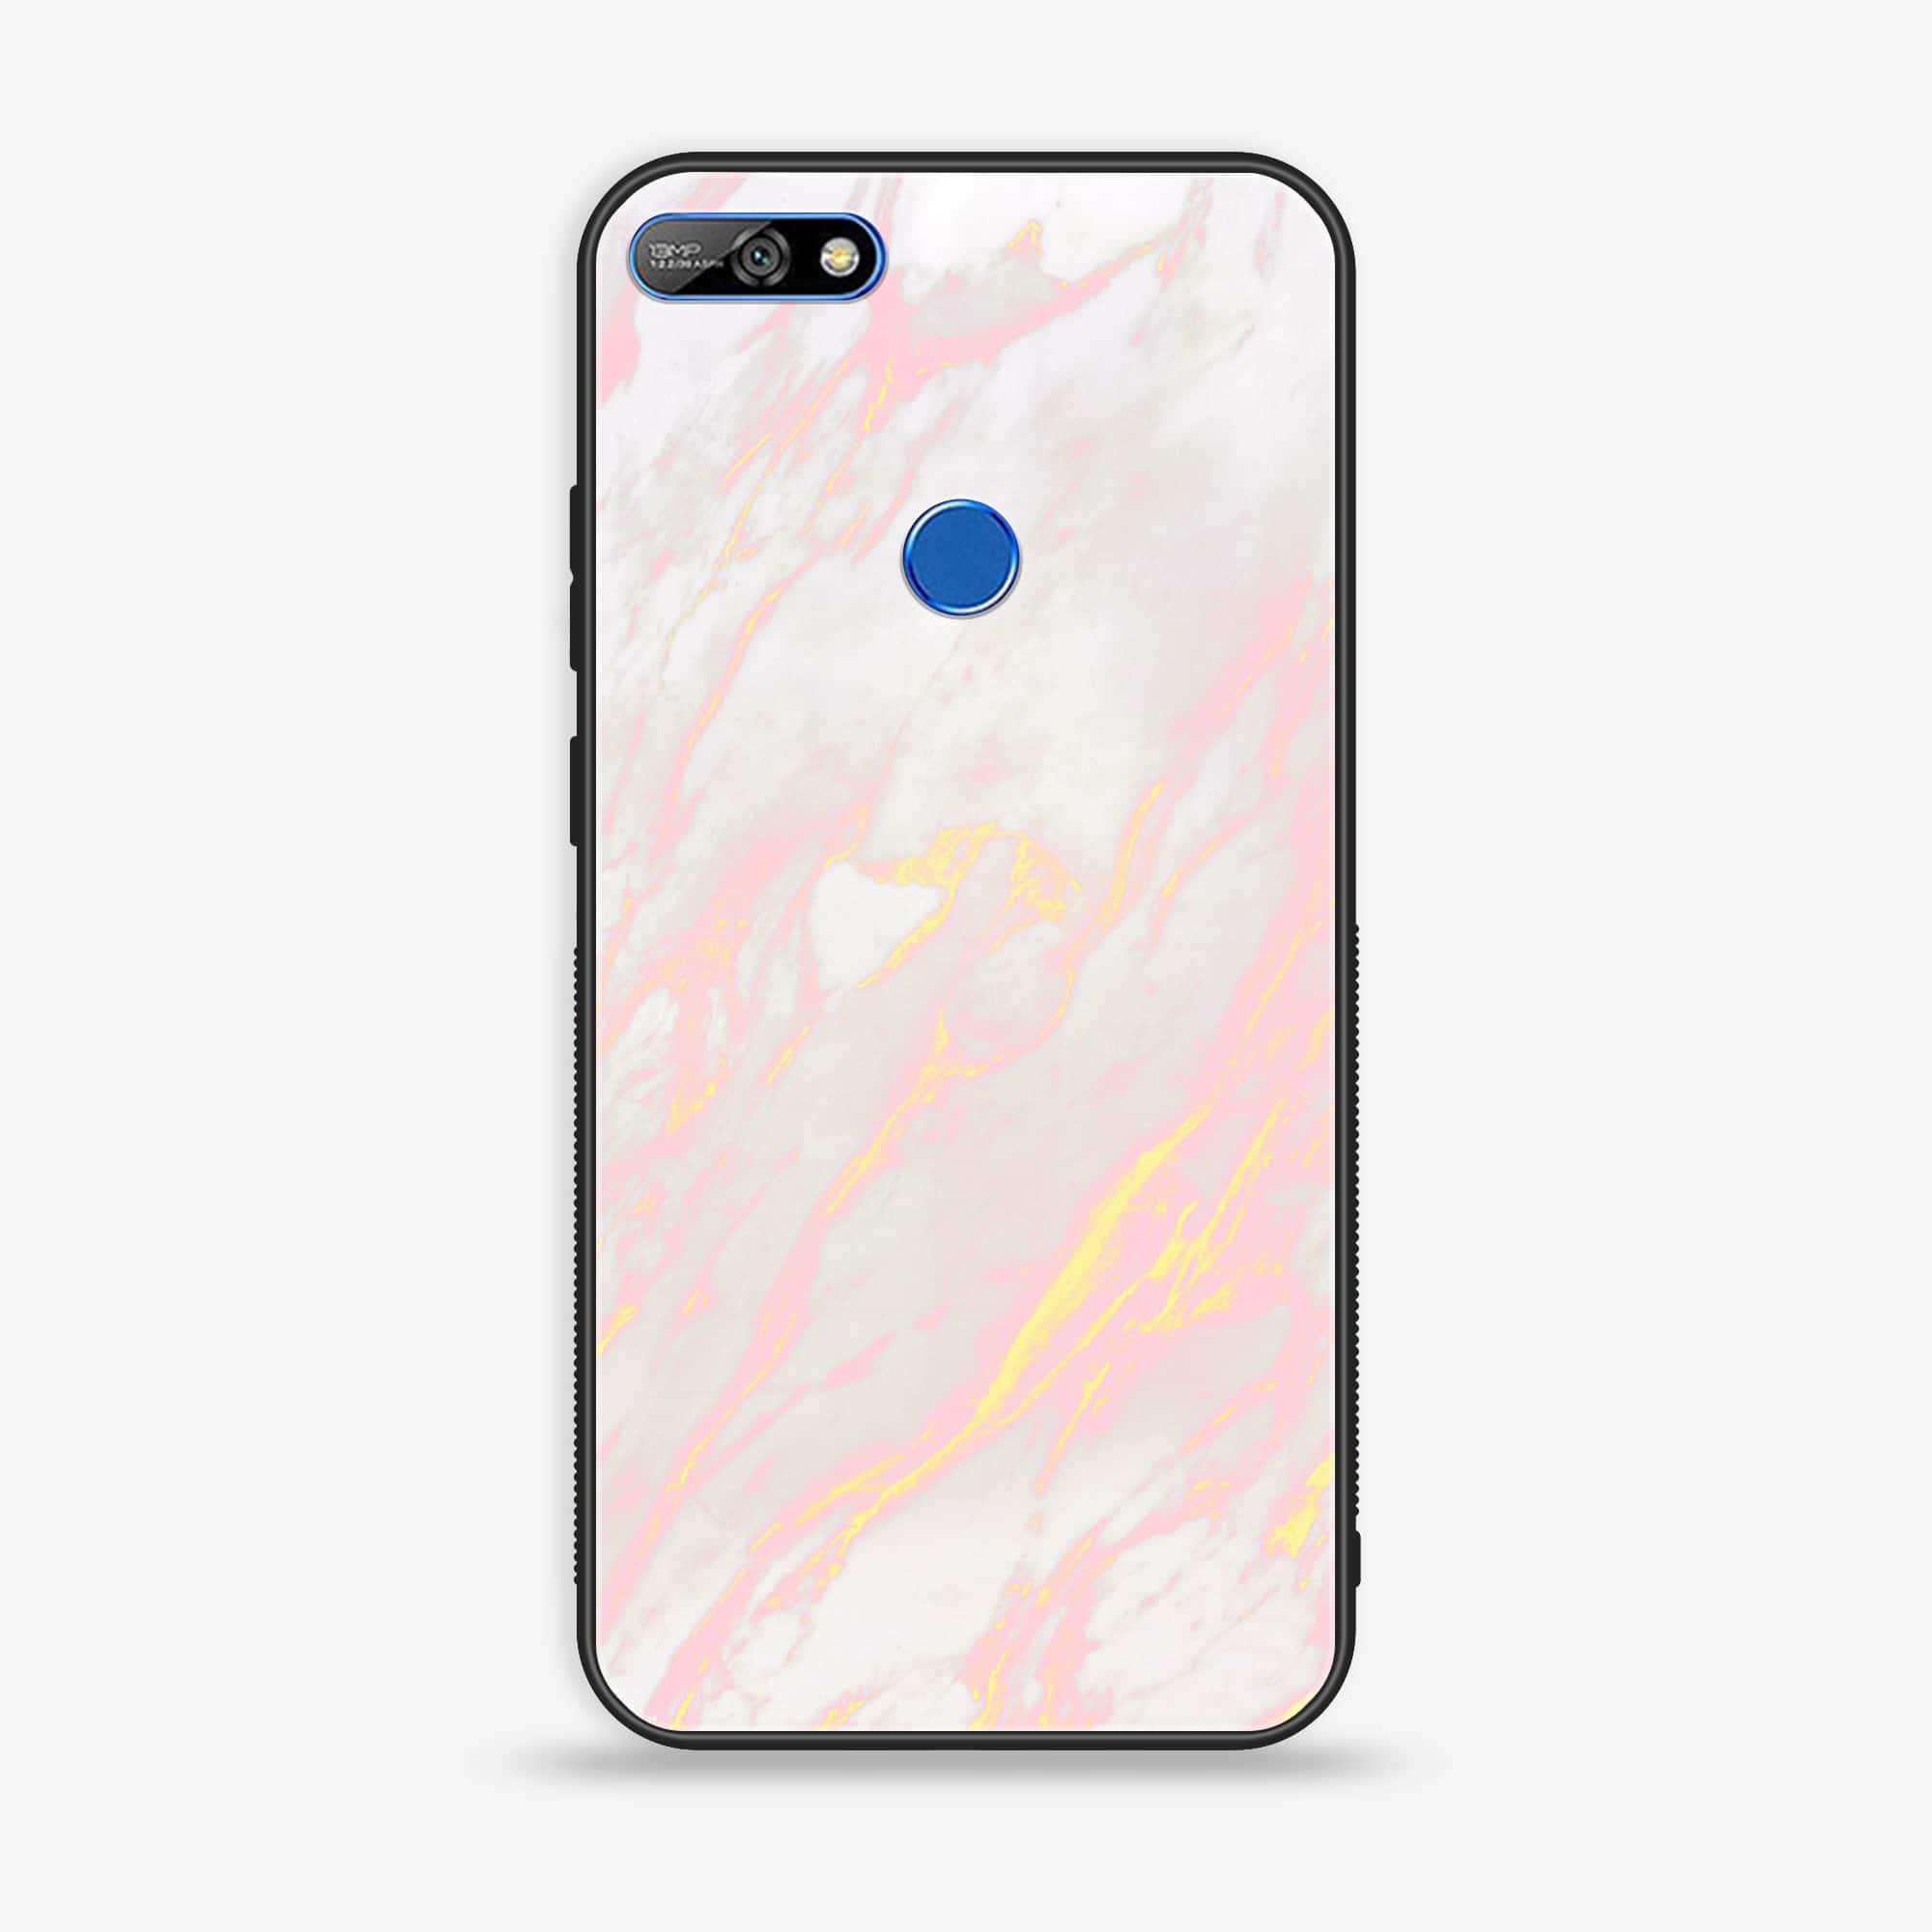 Huawei Y7 Prime (2018) -  Pink Marble Series - Premium Printed Glass soft Bumper shock Proof Case